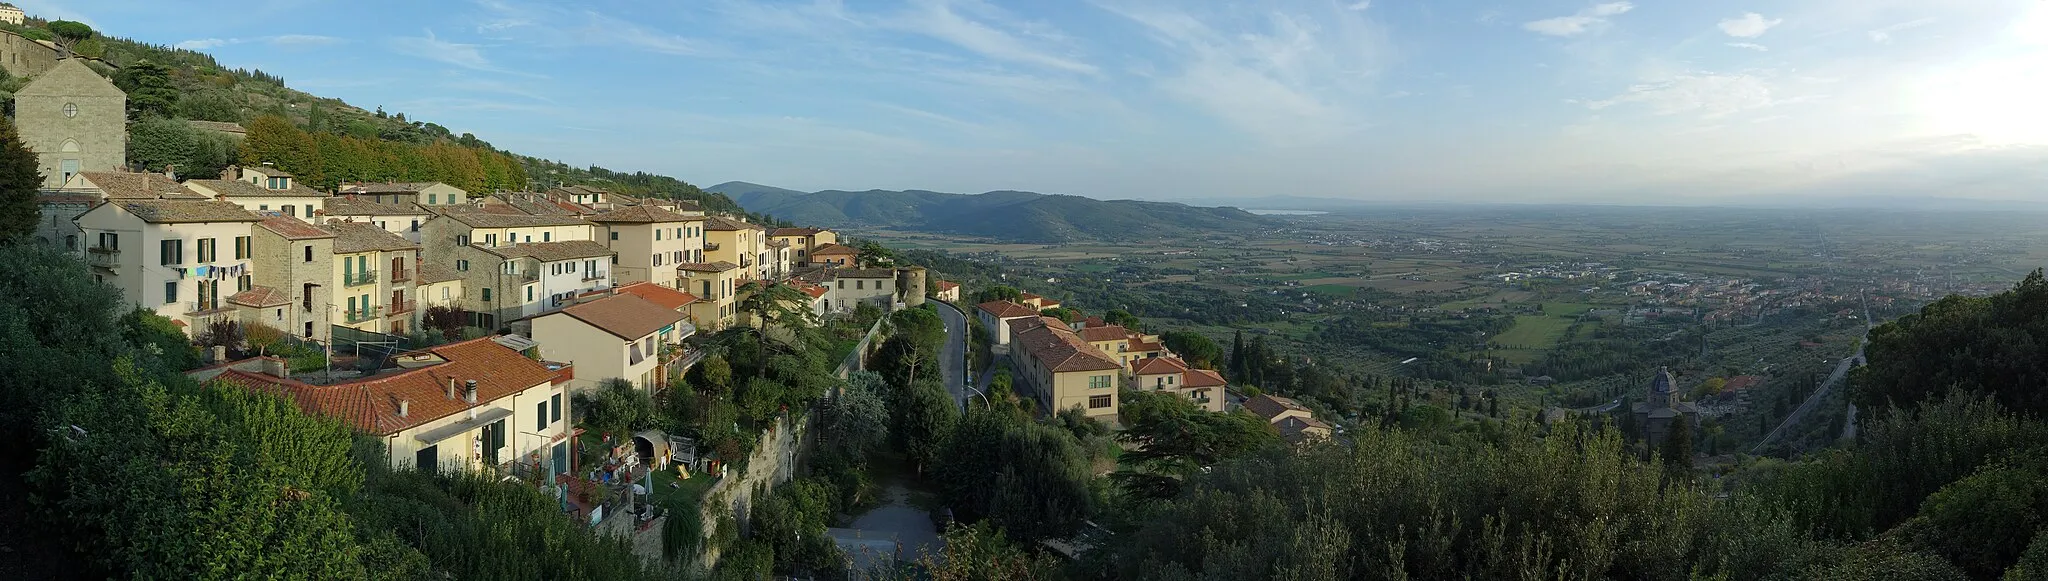 Photo showing: A panorama photographed from the Piazza Garibaldi in Cortona, Tuscany, Italy. It shows Cortona, on the hill to the left, its village, Camucia, in the plain on the center right, and, in the center background, Lake Trasimeno.